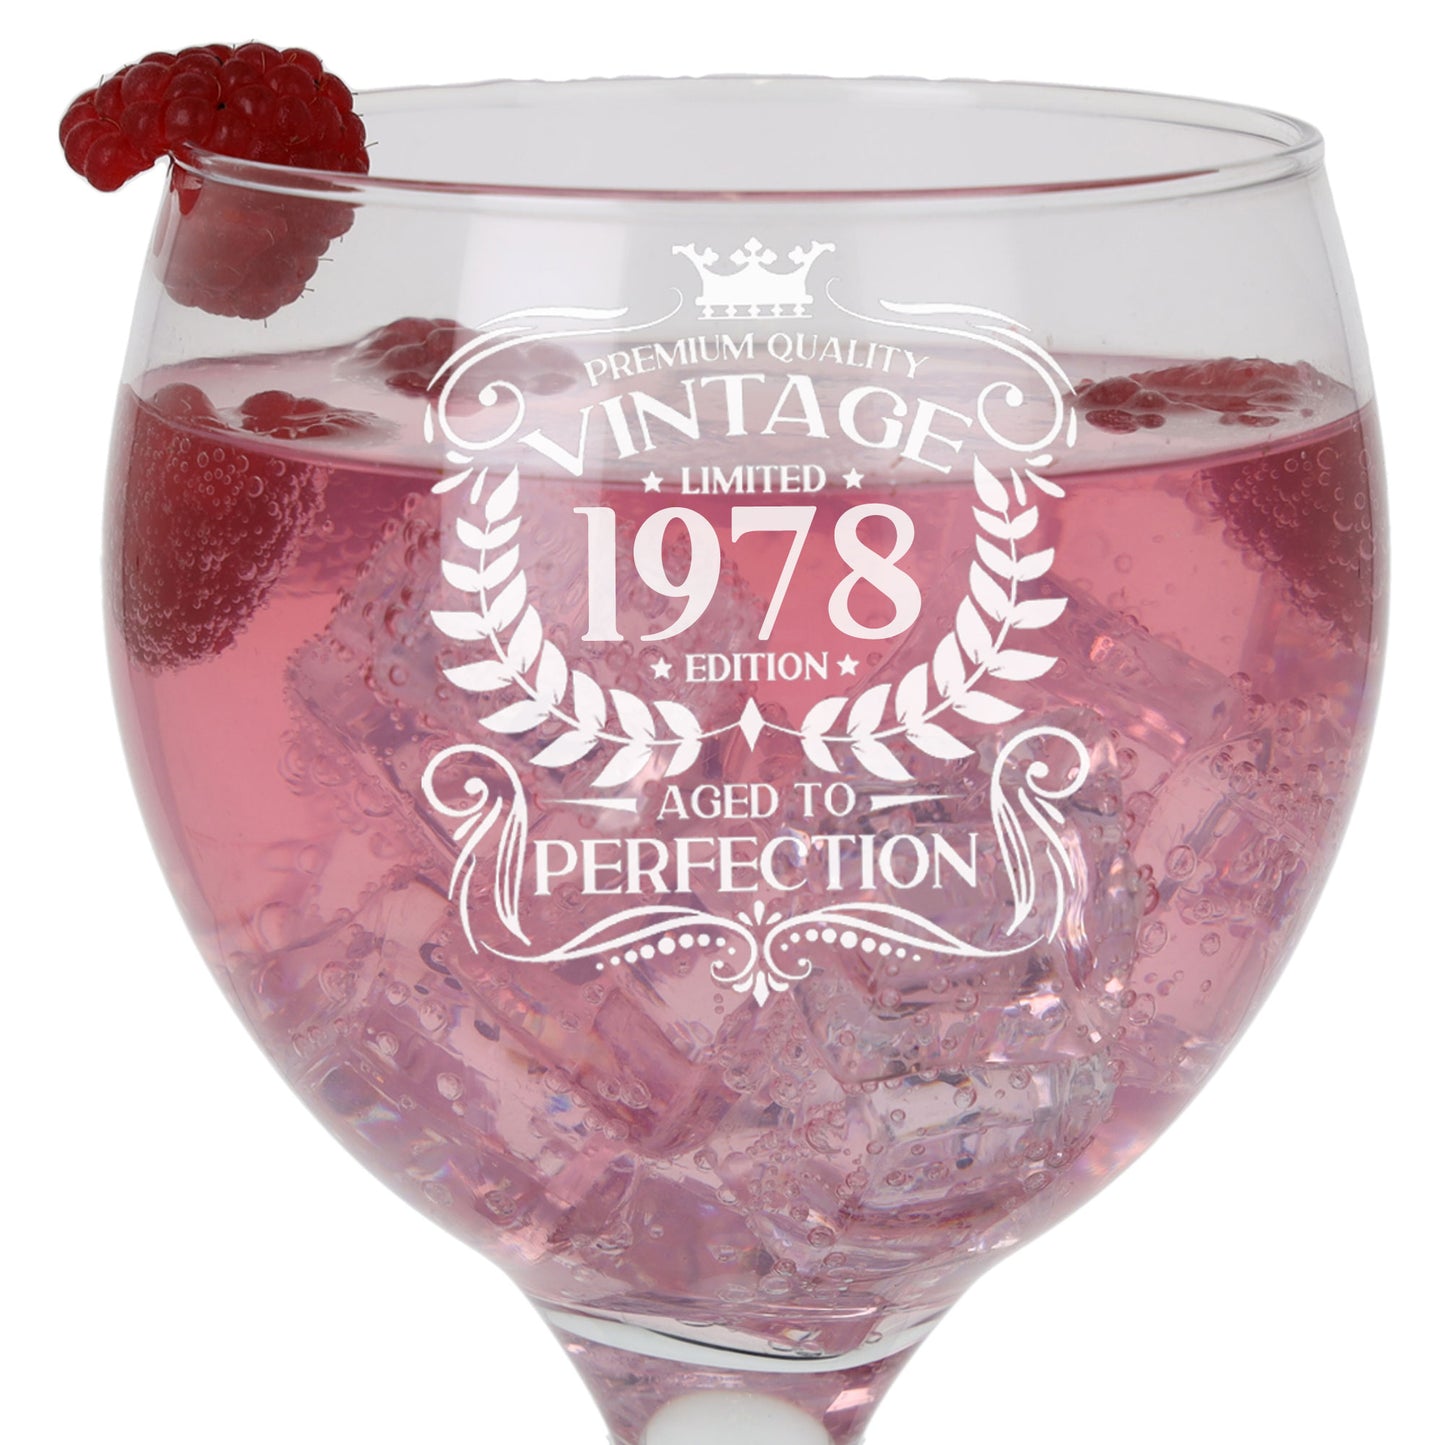 Vintage 1978 45th Birthday Engraved Gin Glass Gift  - Always Looking Good -   